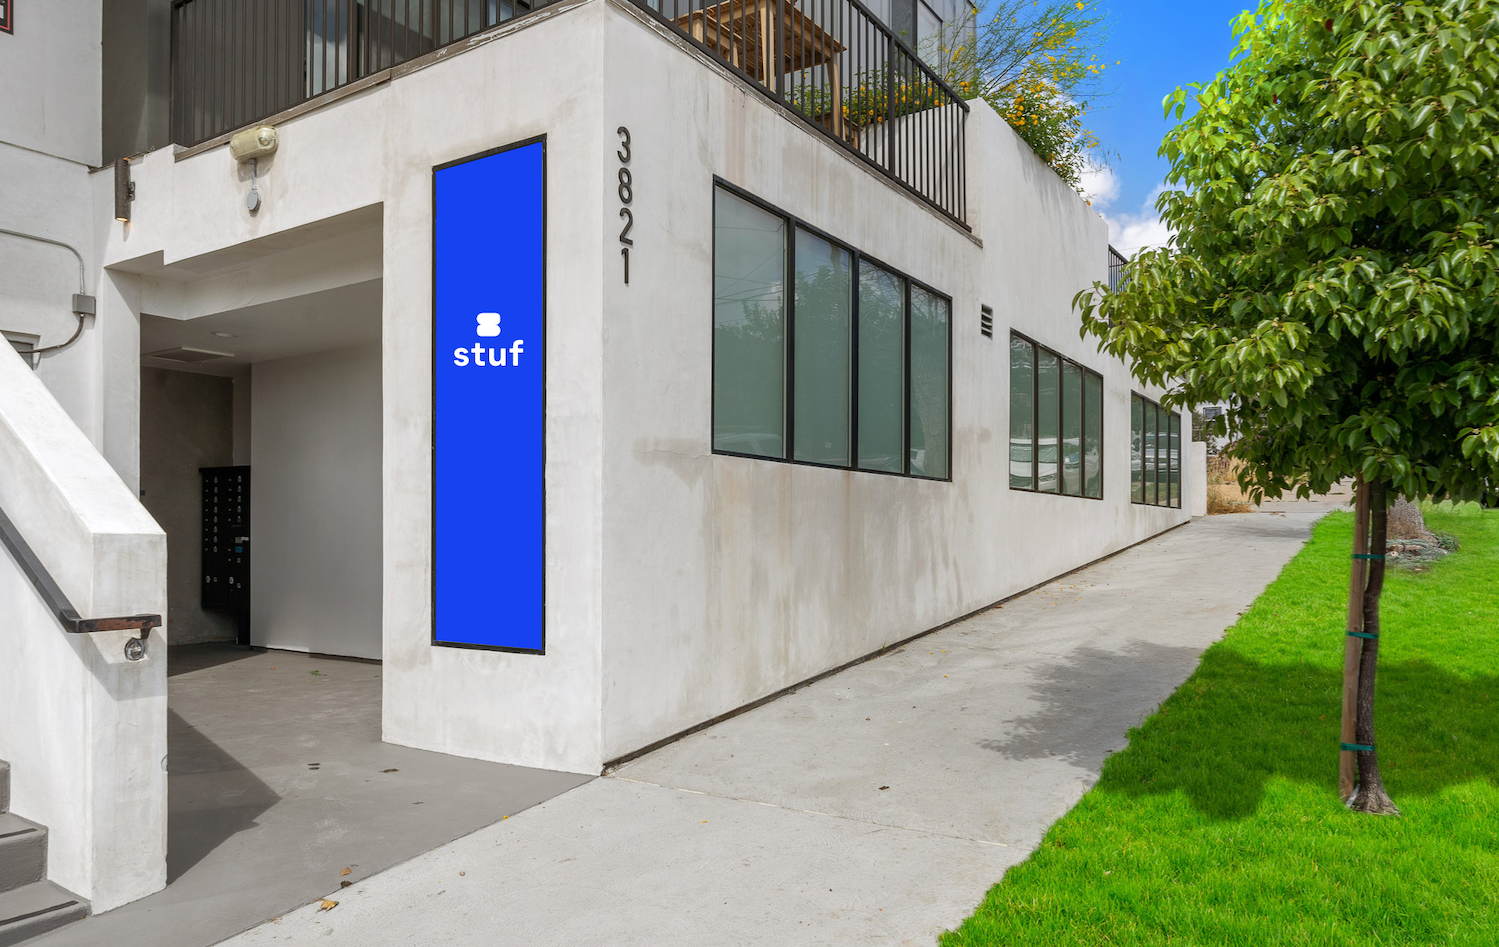 Stuf's logo on a blue sign affixed to a gray building in Los Angeles' Eagle Rock neighborhood.